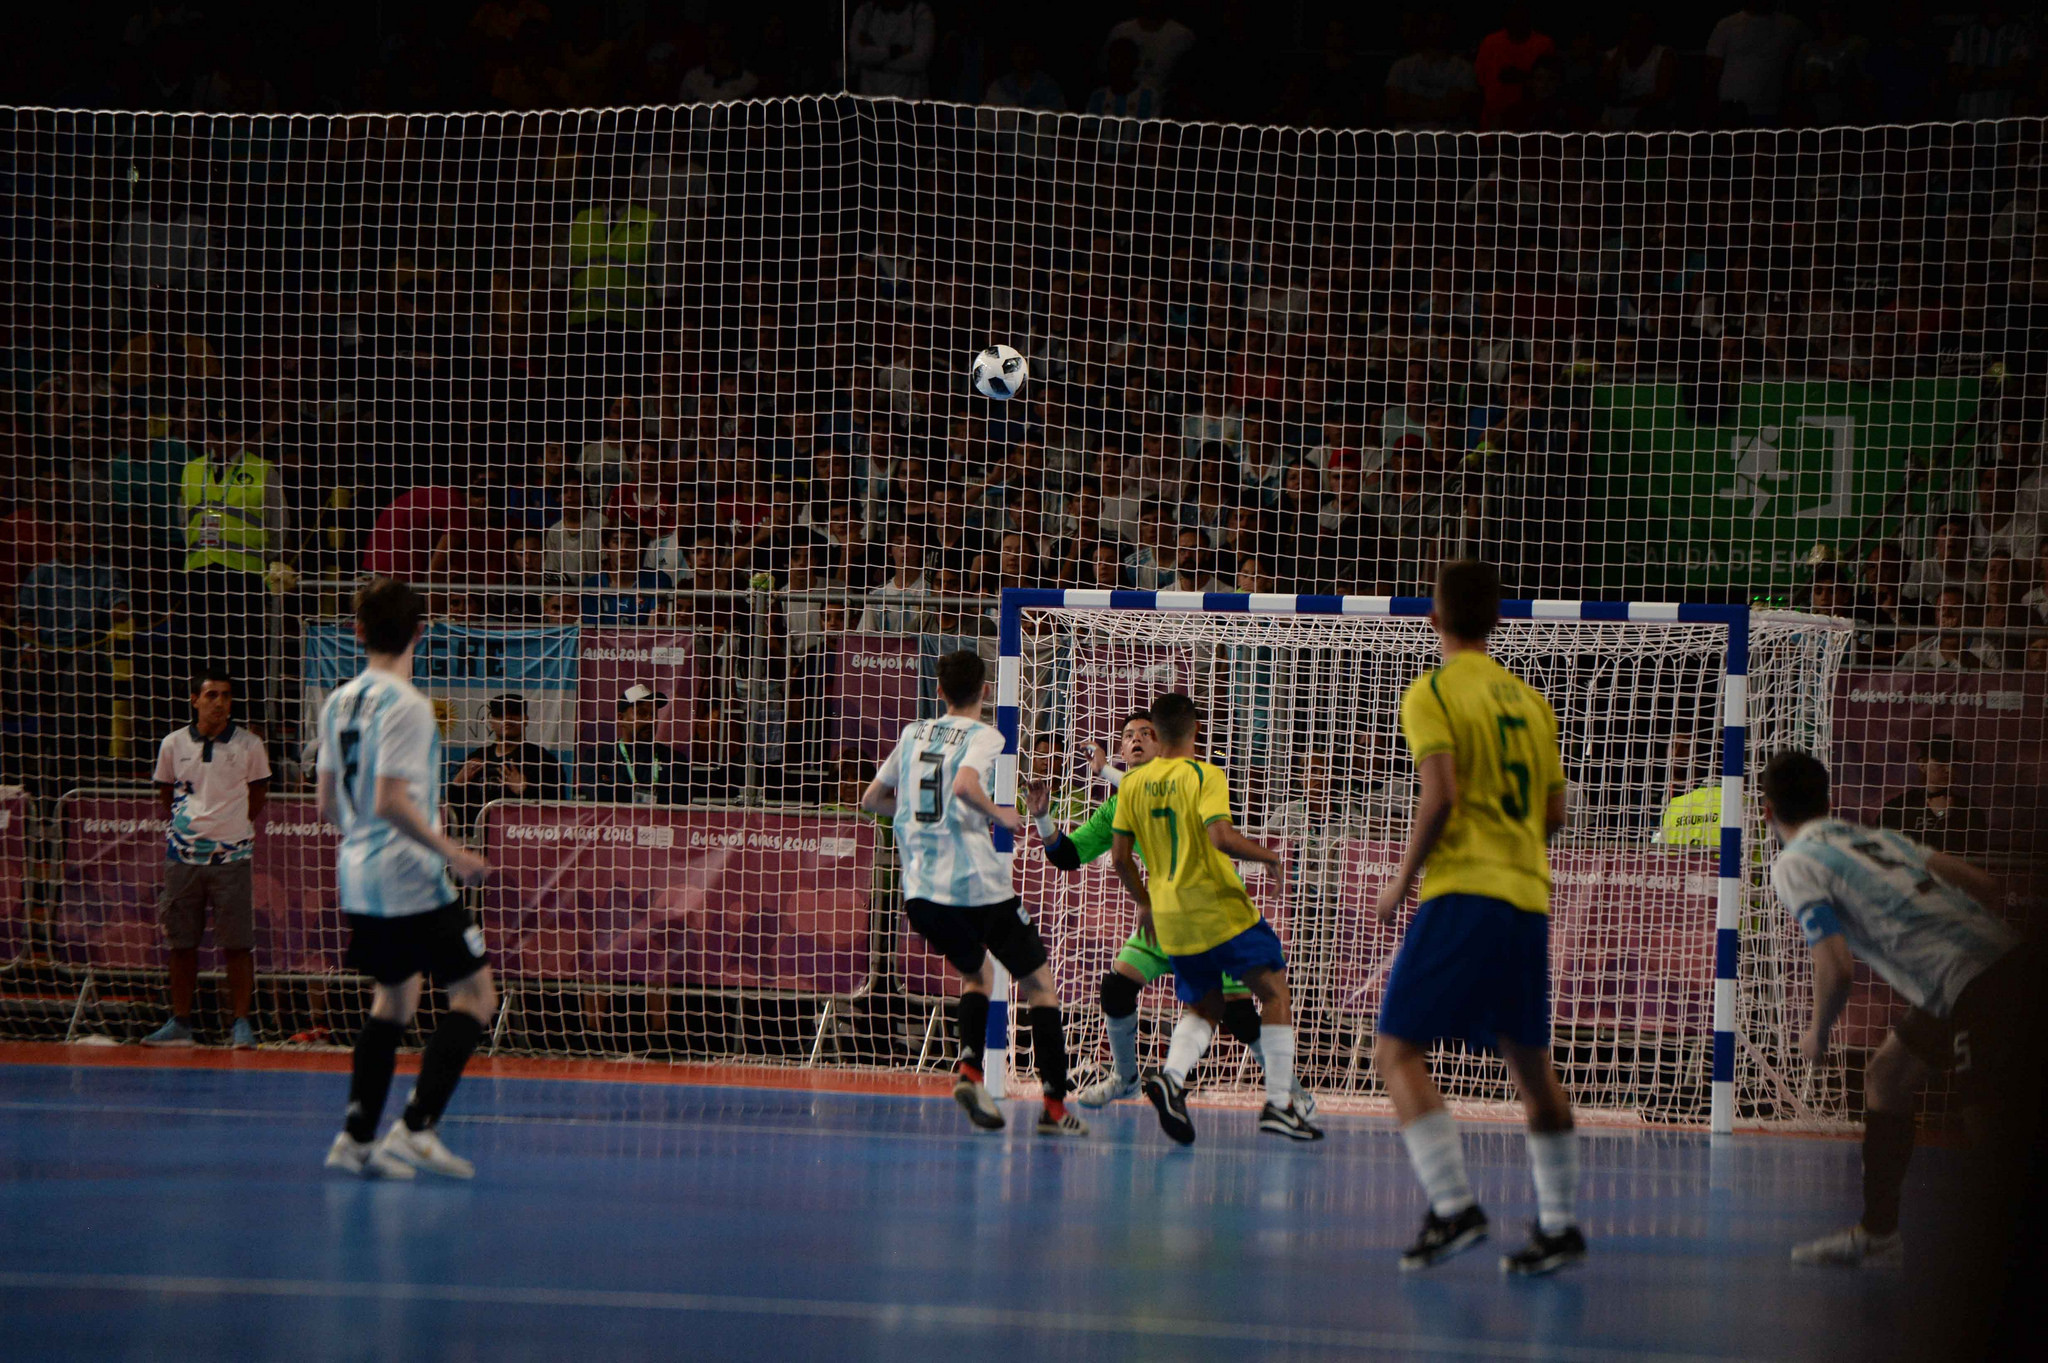 Futsal was one of the sports to strike a chord with the locals at the third edition of the Summer Youth Olympics ©Buenos Aires 2018